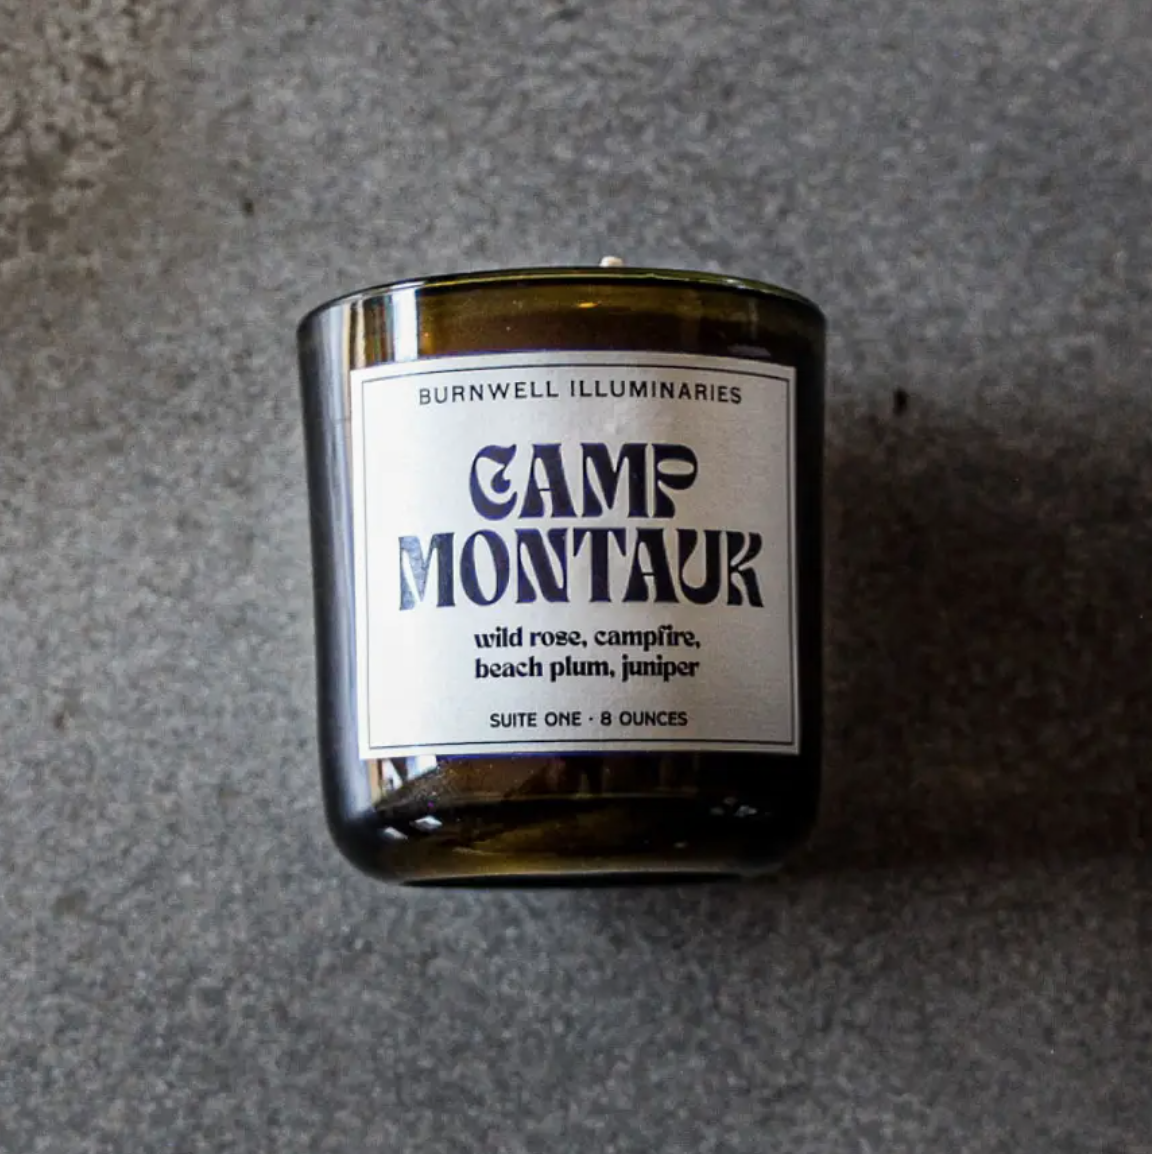 A Barnaby Black Candle in a dark glass jar labeled "Camp Montauk" with scent notes of wild rose, campfire, beach plum, and juniper listed, placed on a gray textured surface in Arizona style. (Brand: Faire)